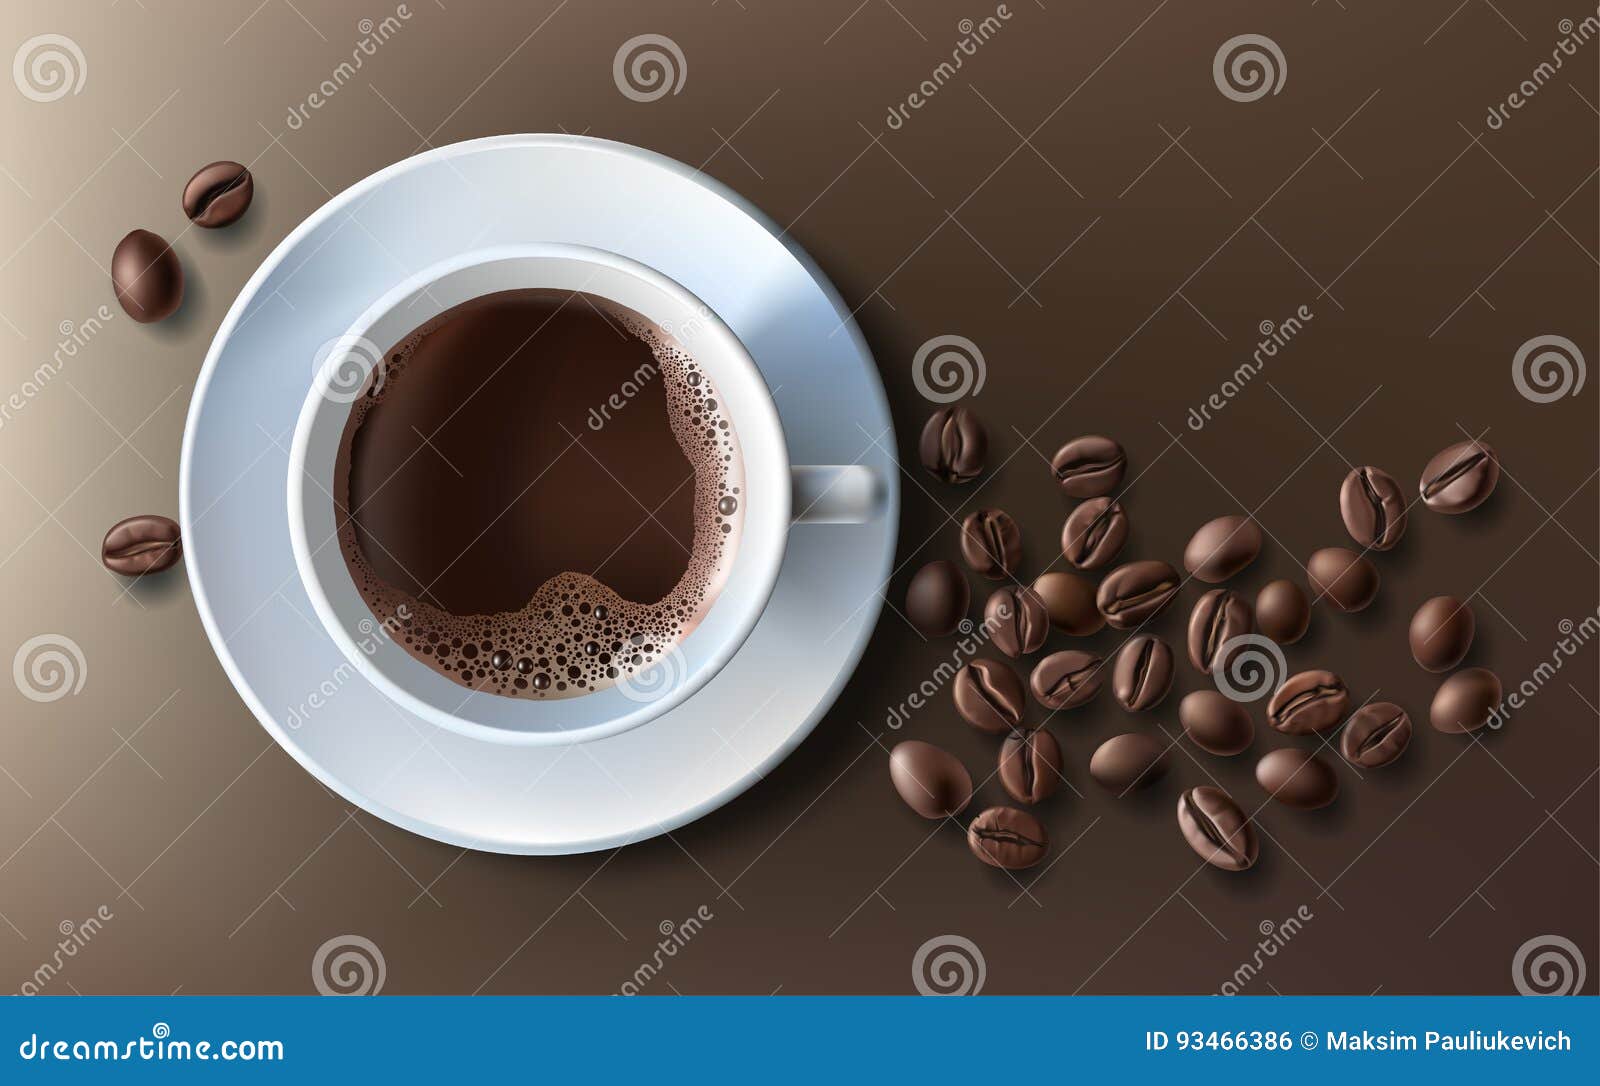 https://thumbs.dreamstime.com/z/vector-illustration-realistic-style-white-coffee-cup-saucer-coffee-beans-top-view-isolated-brown-print-93466386.jpg